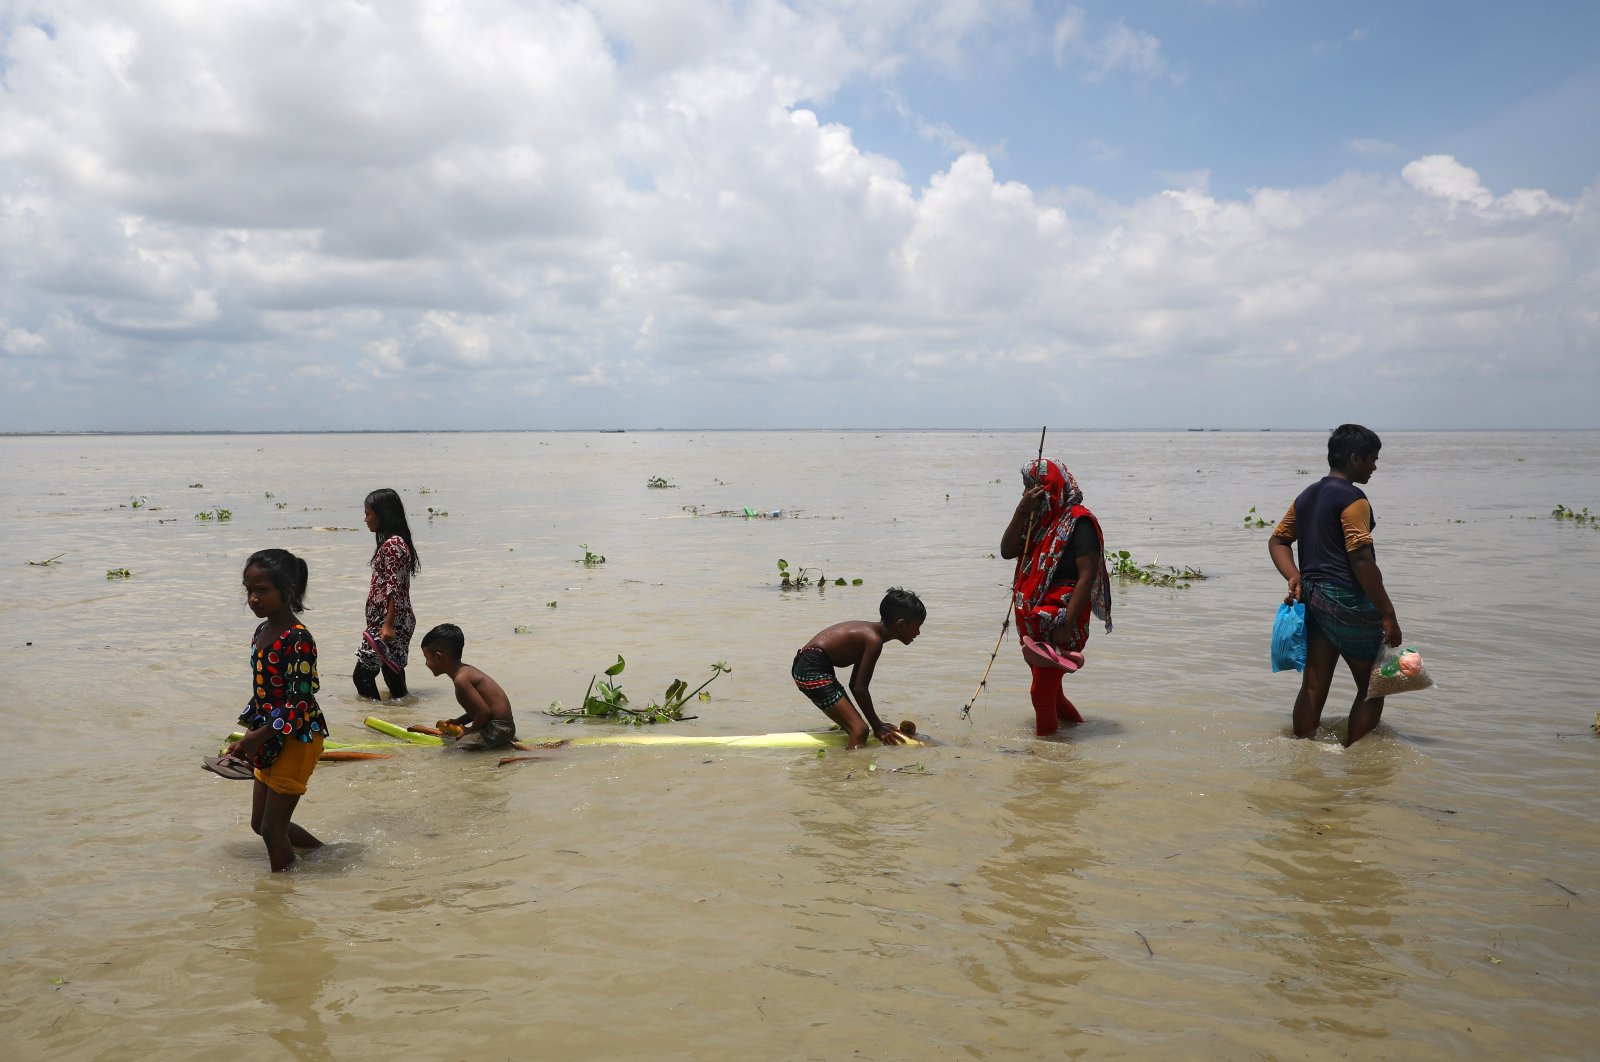 People walk in a street flooded by the Padma River as the flood situation worsens in Munshiganj district, on the outskirts of Dhaka, Bangladesh, July 25, 2020. (Reuters Photo)